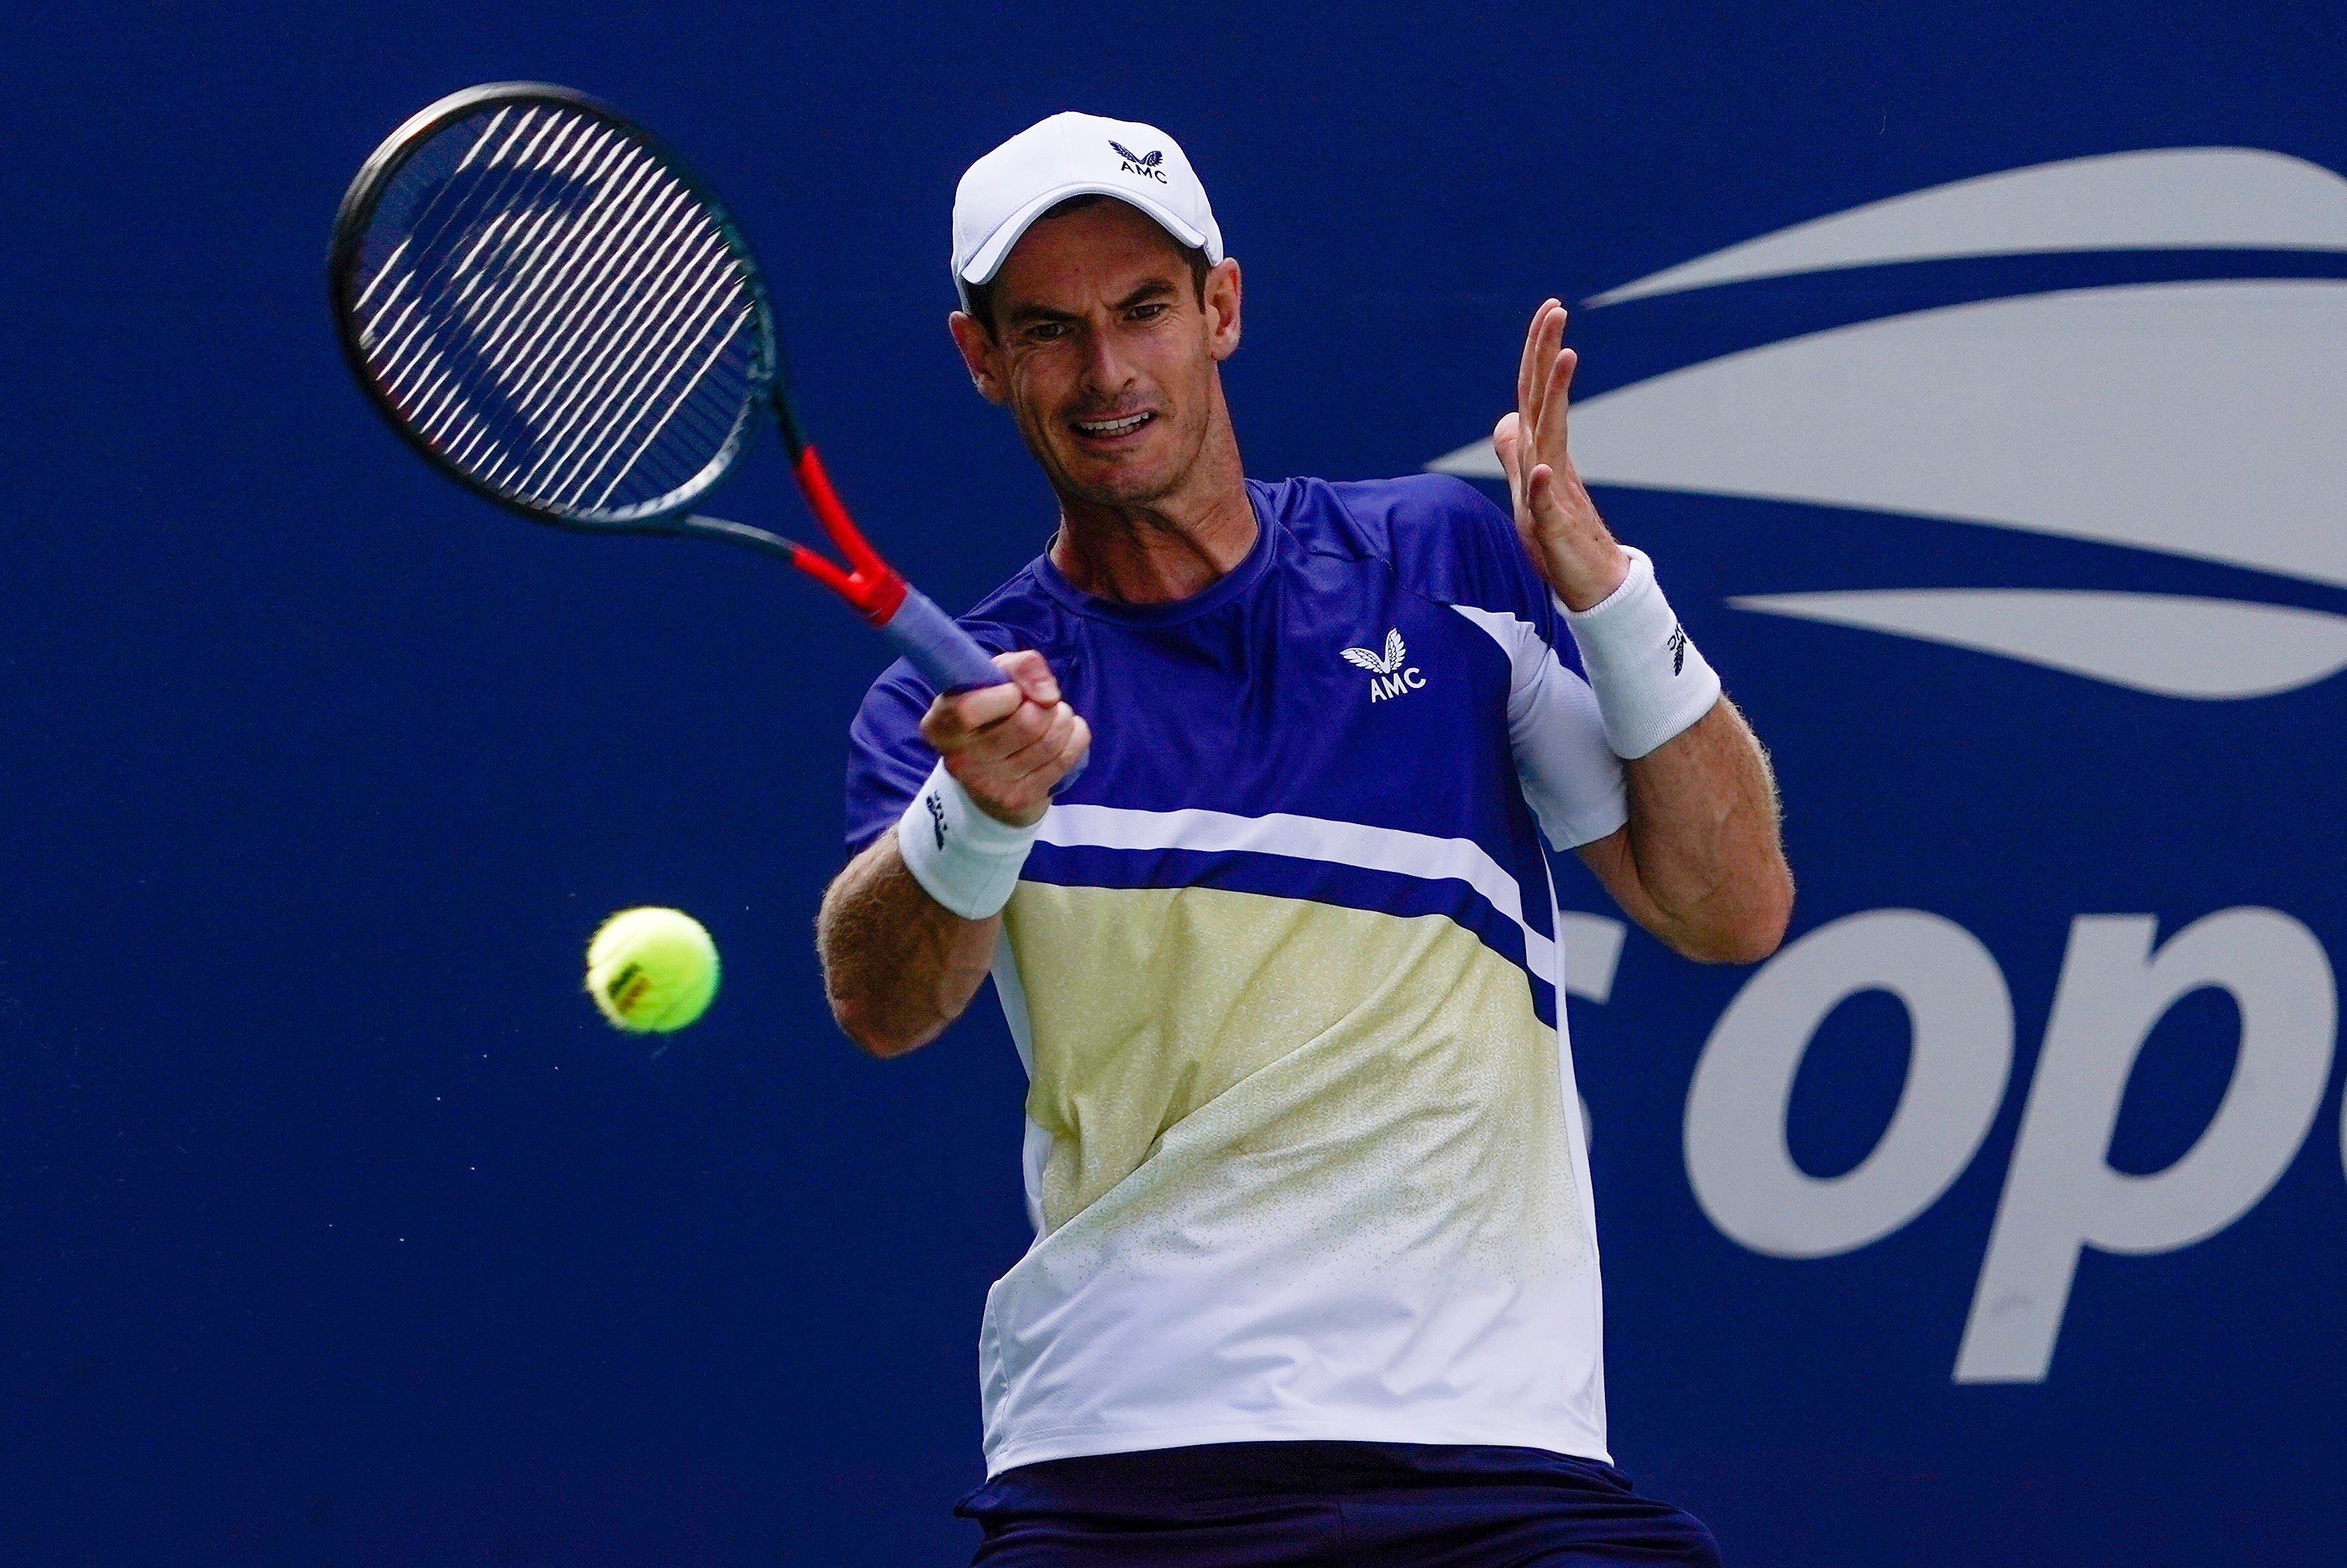 Andy Murray led a successful day for Britain at Flushing Meadows (Seth Wenig/AP)